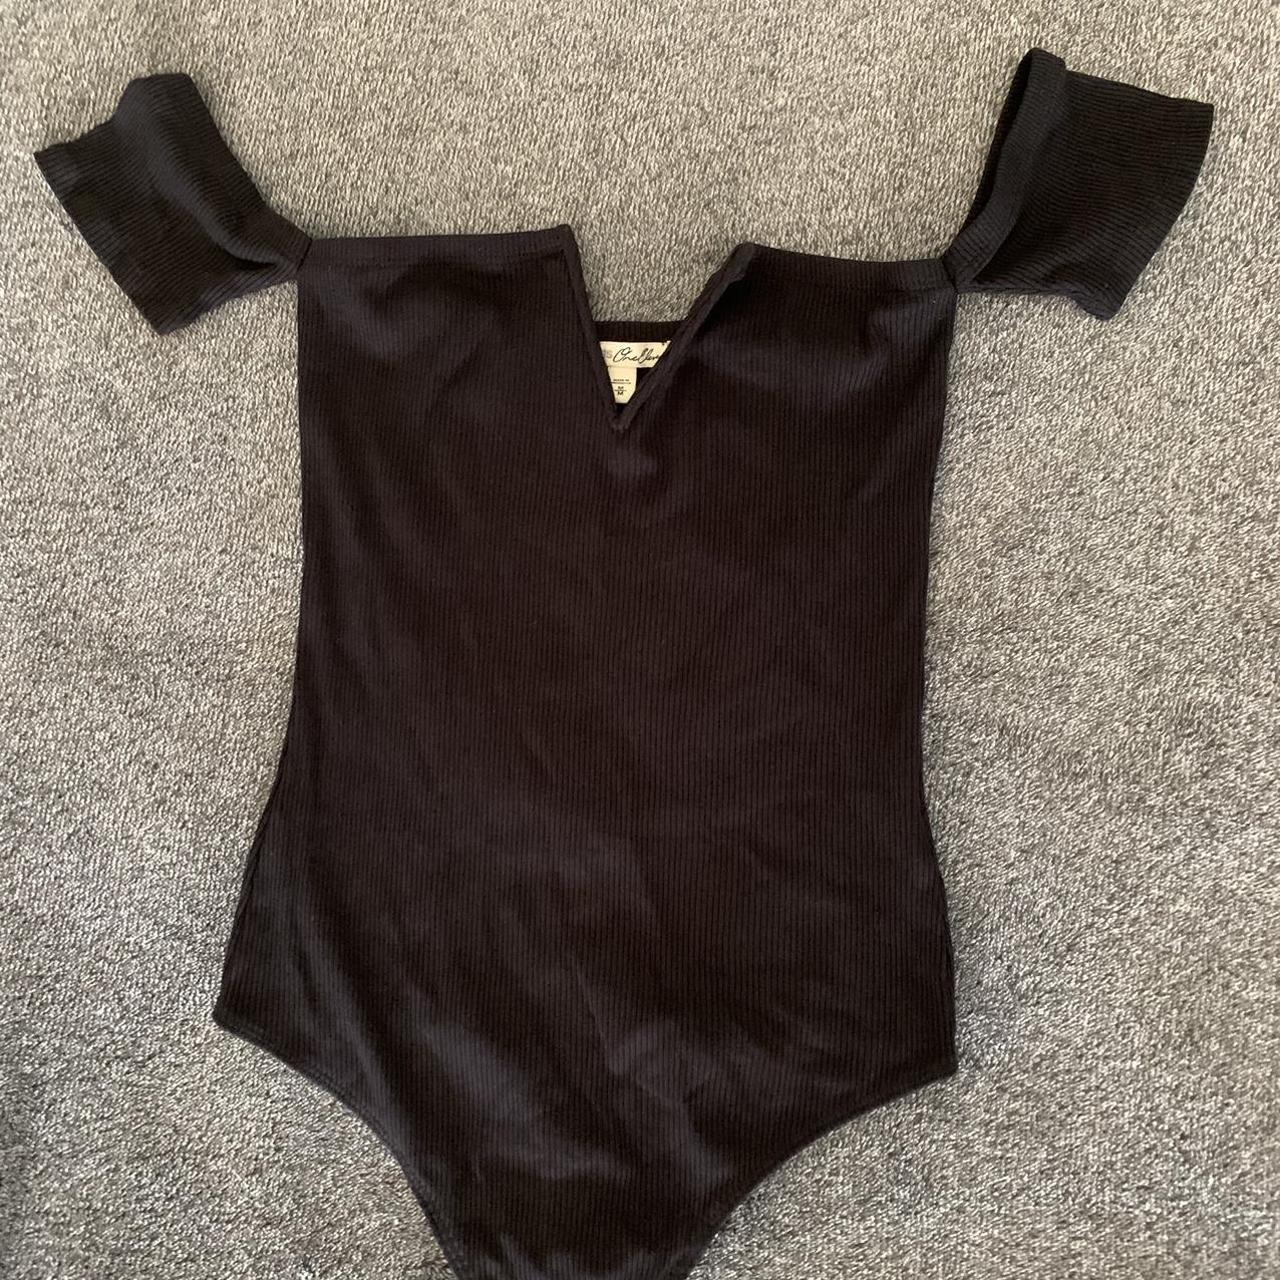 Express body suit size Medium Free gift with - Depop